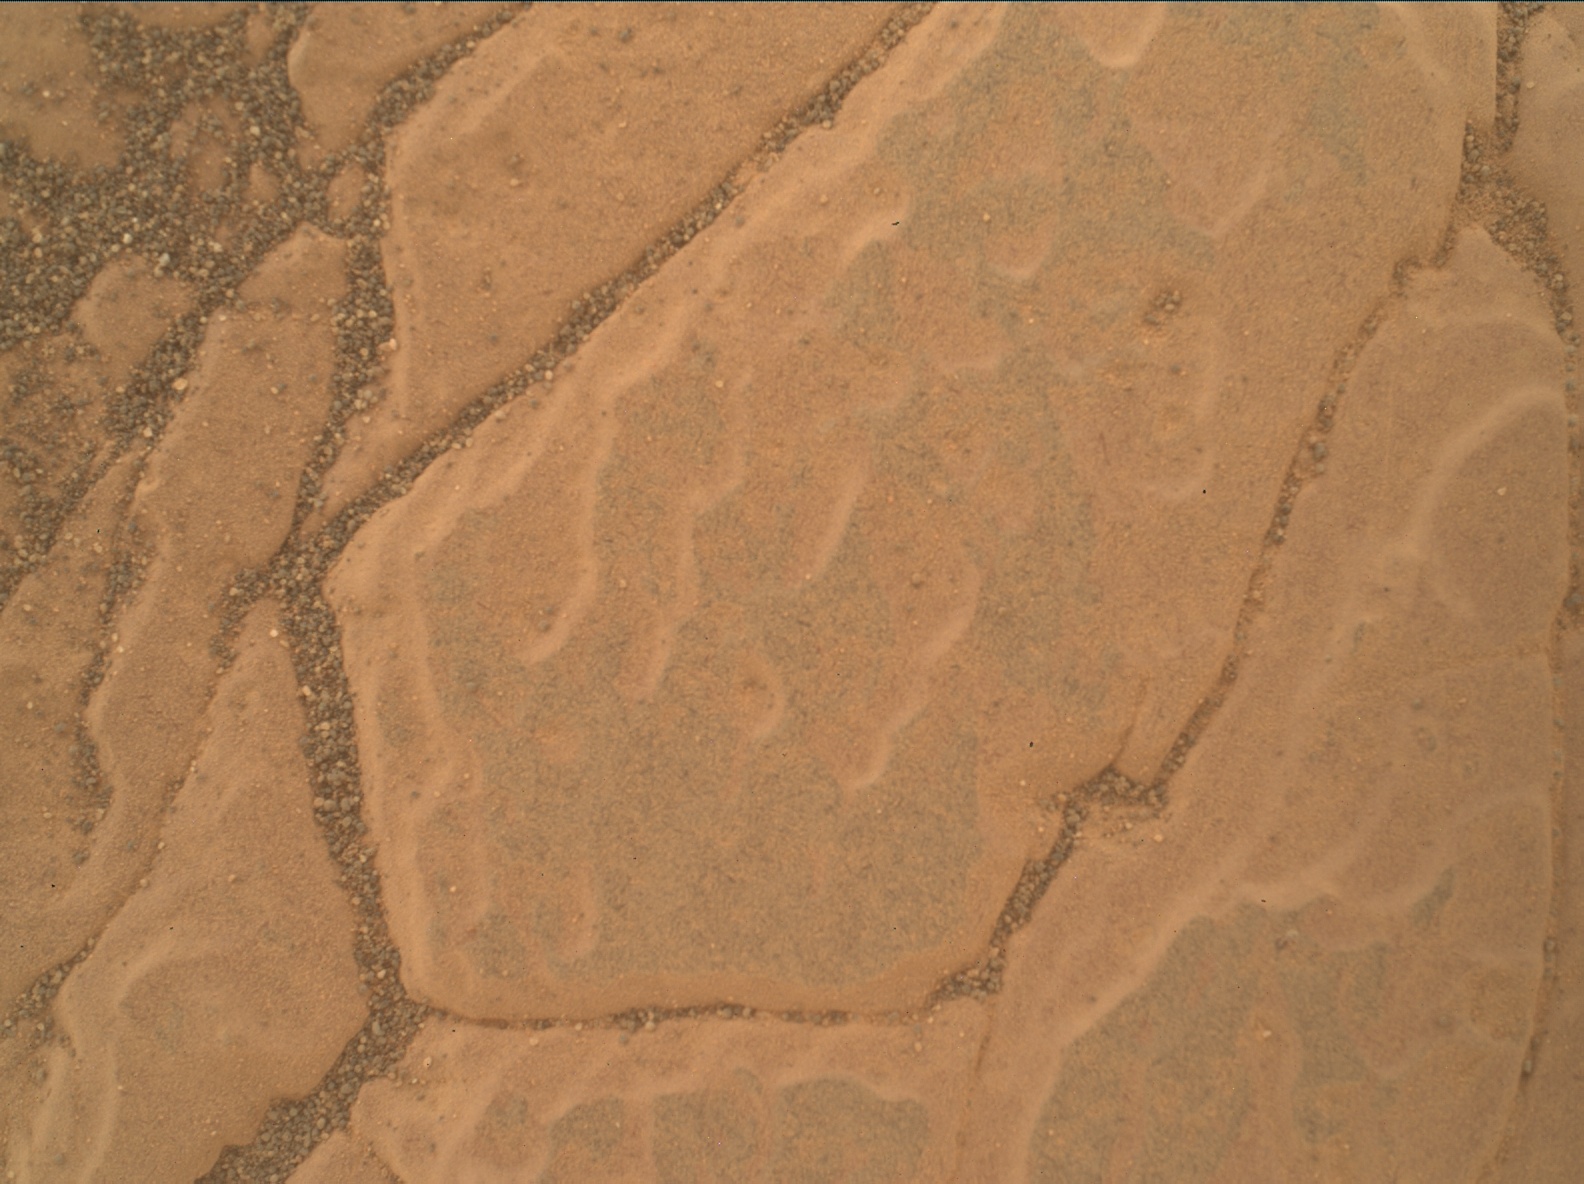 Nasa's Mars rover Curiosity acquired this image using its Mars Hand Lens Imager (MAHLI) on Sol 3013